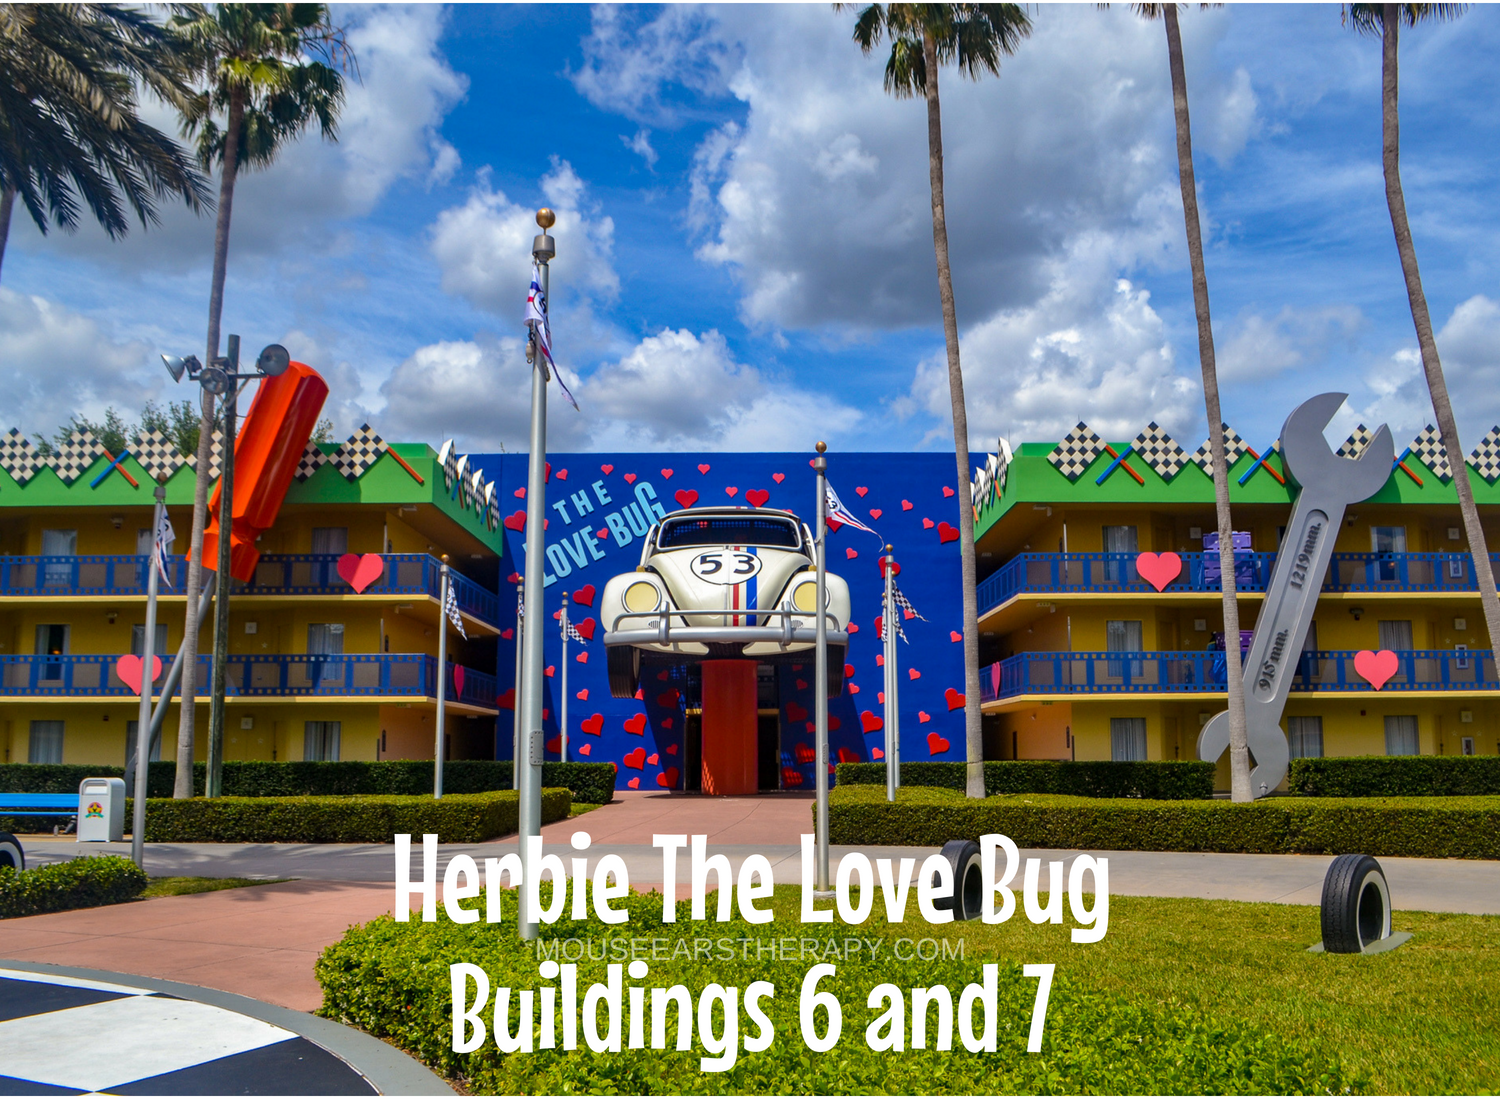 View of Herbie the Love Bug buildings 6 and 7 at All Star Movies value resort.